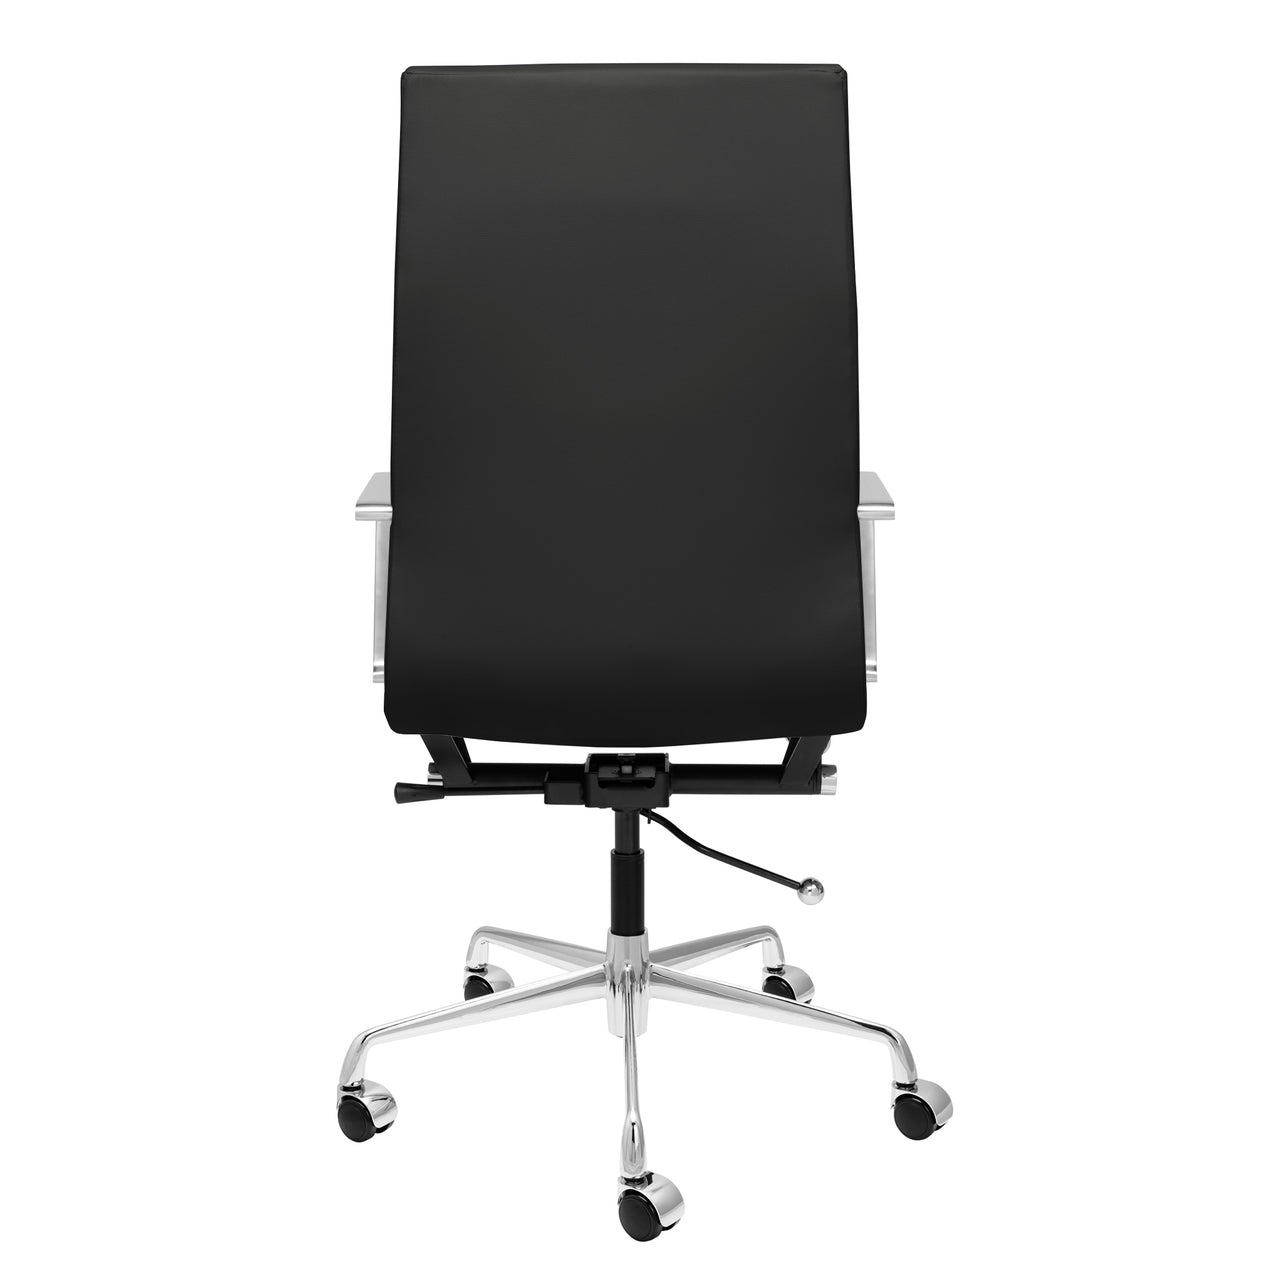 SOHO II Tall Back Ribbed Management Chair (Black)